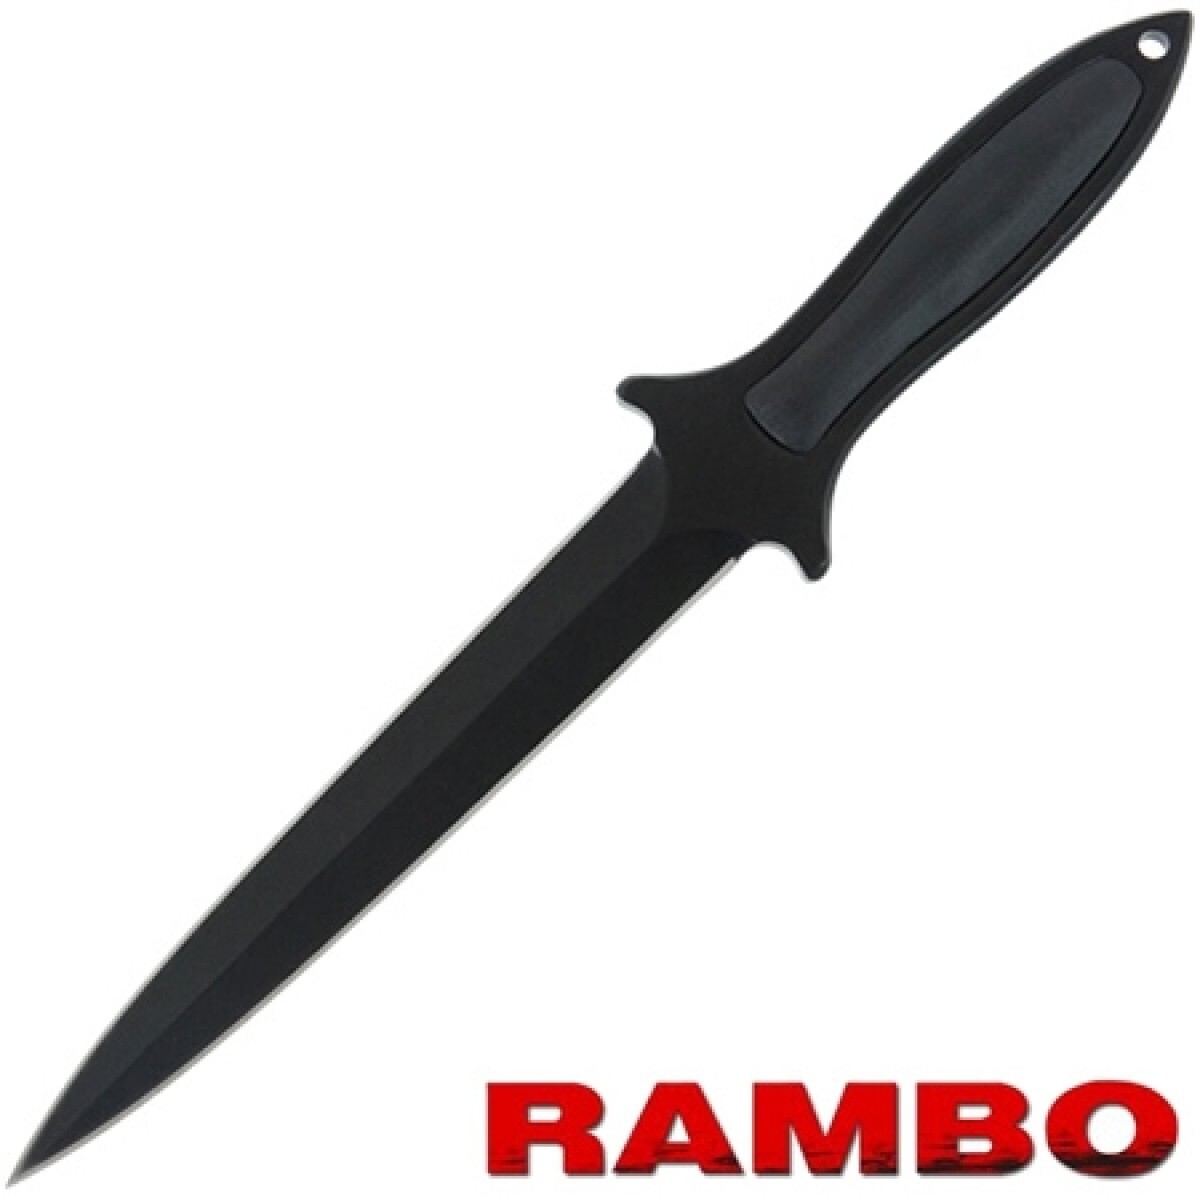 Rambo Boot Knife - First Blood Part II